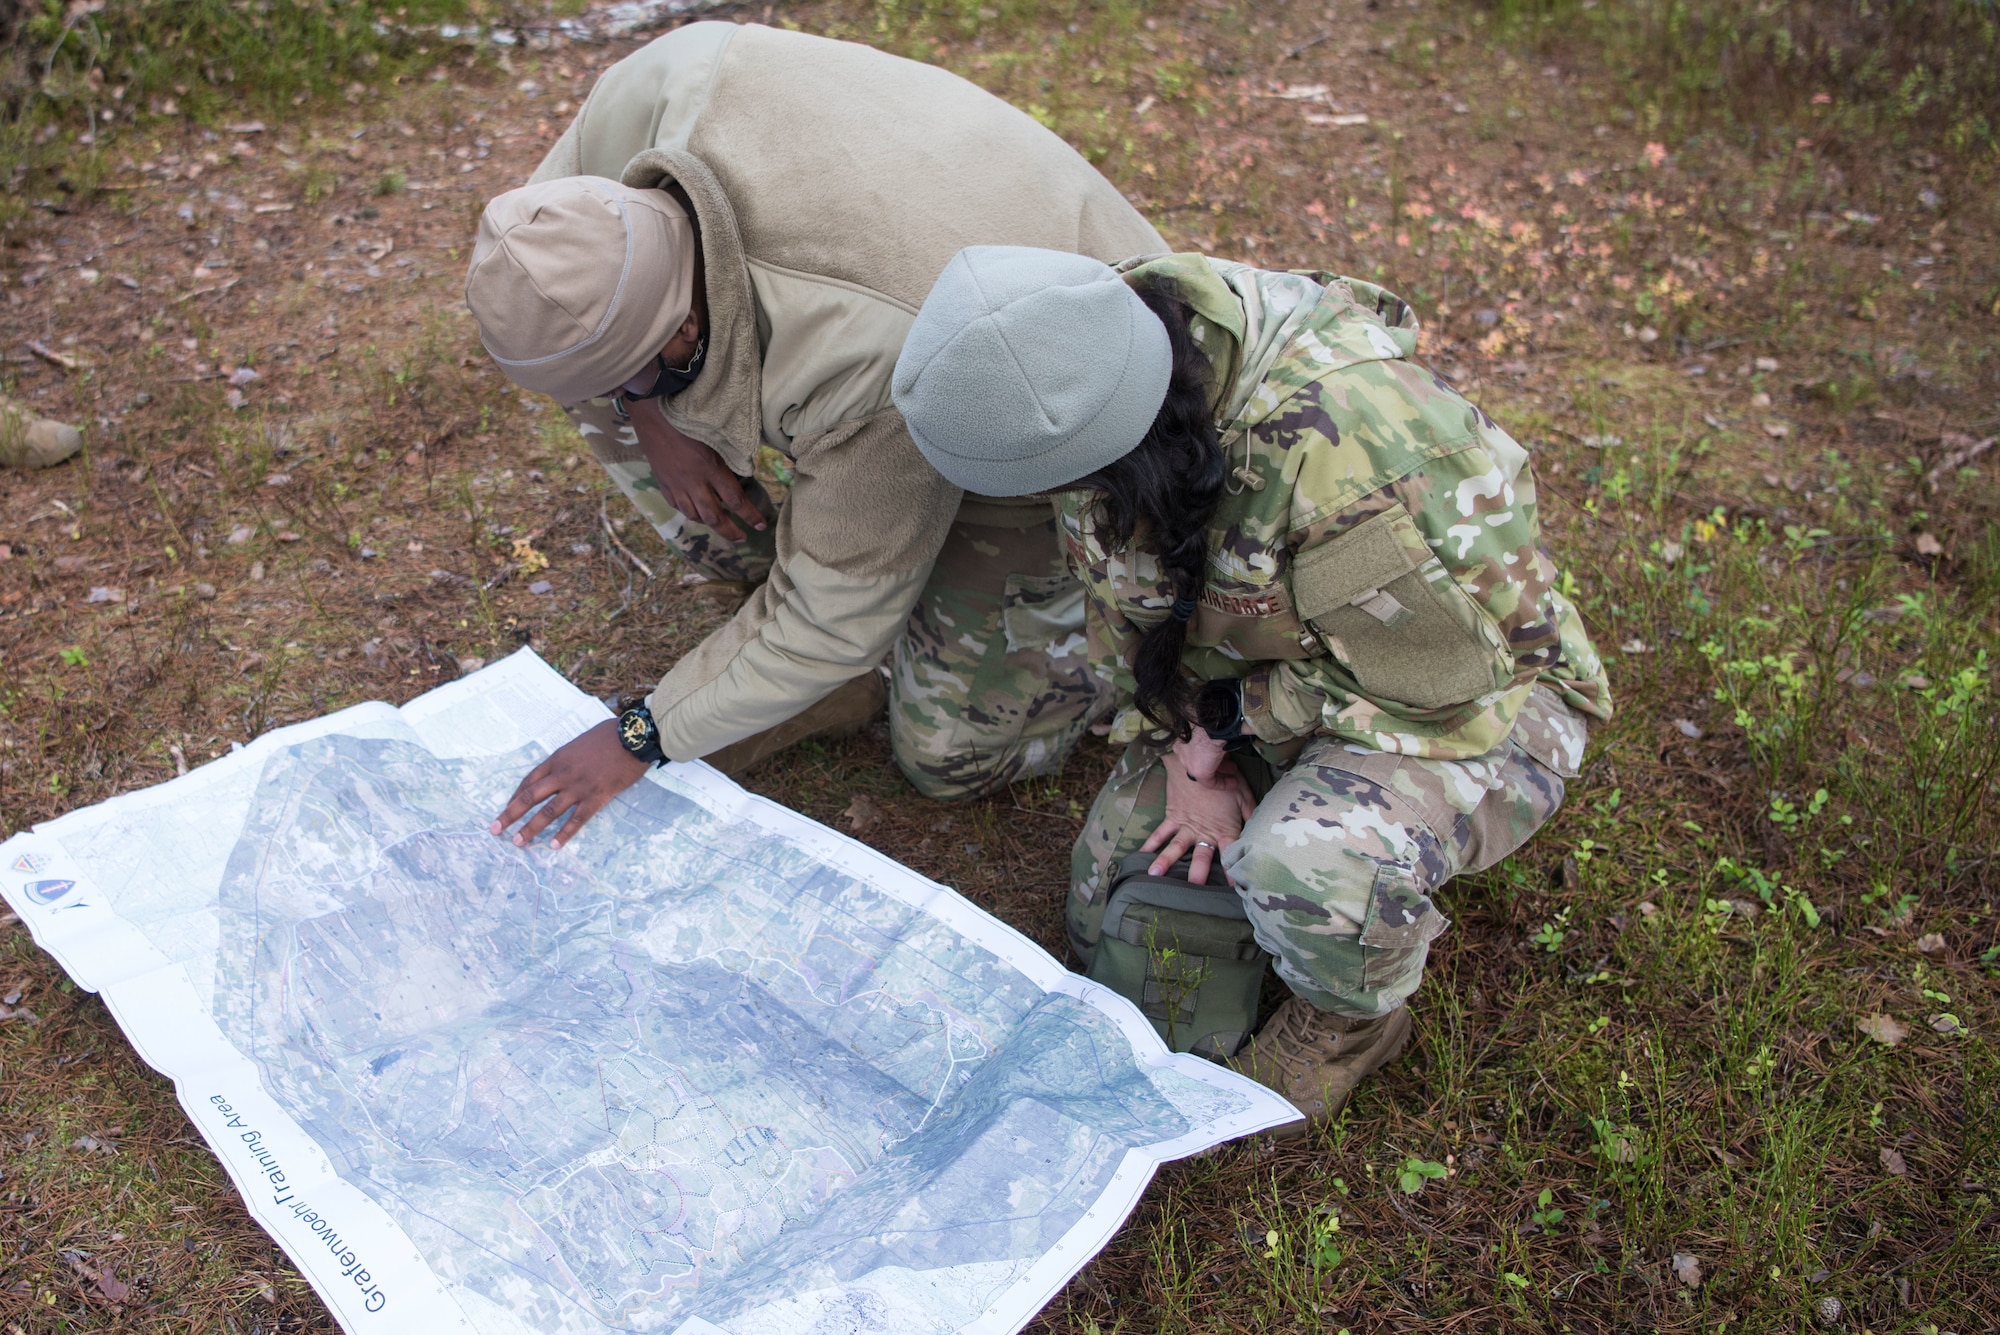 U.S. Airmen assigned to the 435th Contingency Response Group read a map while participating in a Survival, Evasion, Resistance and Escape navigation course during exercise Agile Wolf 21-01.